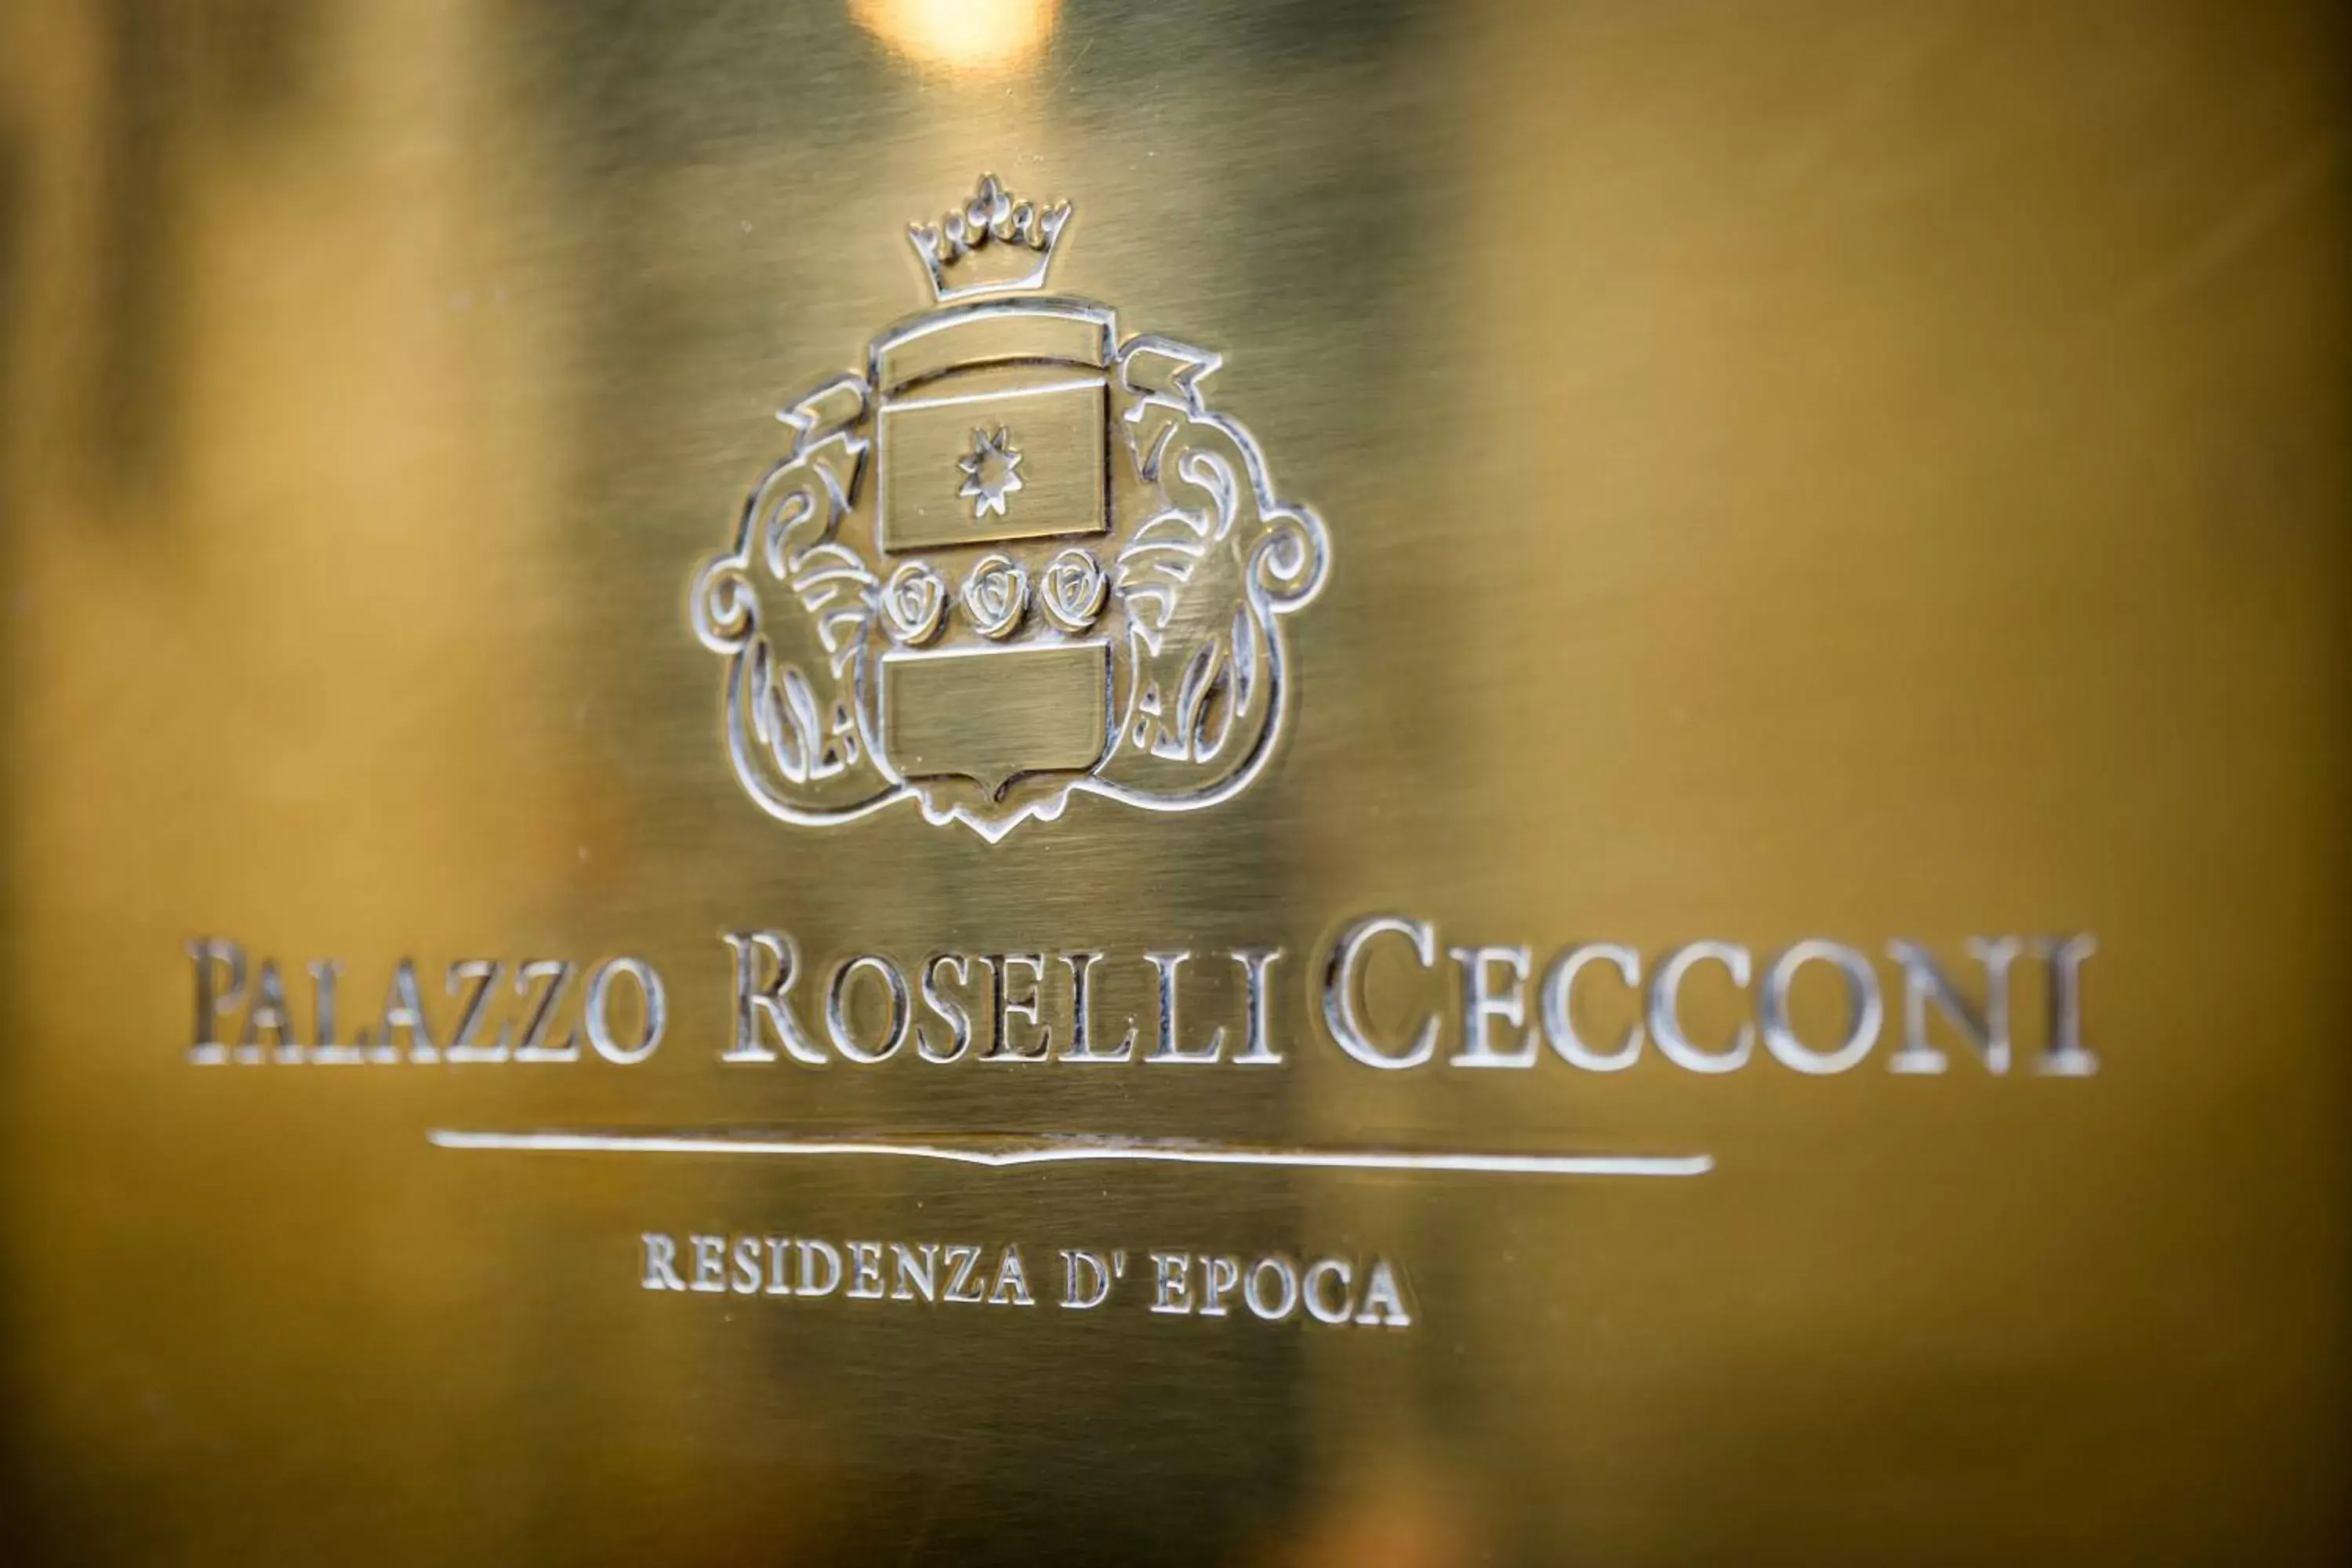 Property logo or sign, Logo/Certificate/Sign/Award in Palazzo Roselli Cecconi